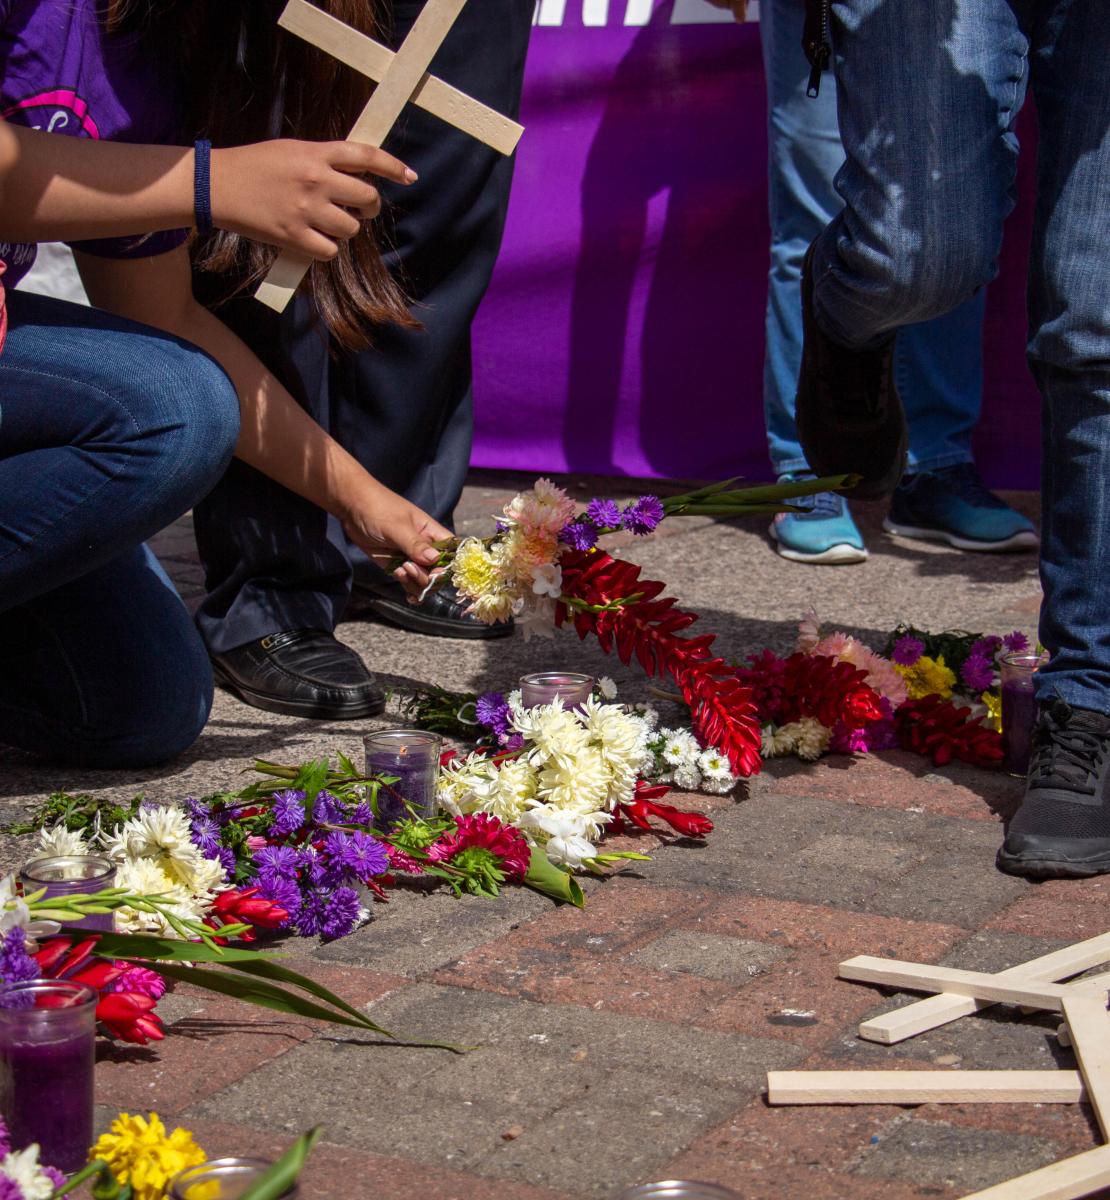 Image shows the people's arms holding crosses kneeled by flowers and crosses piled in front of them. 